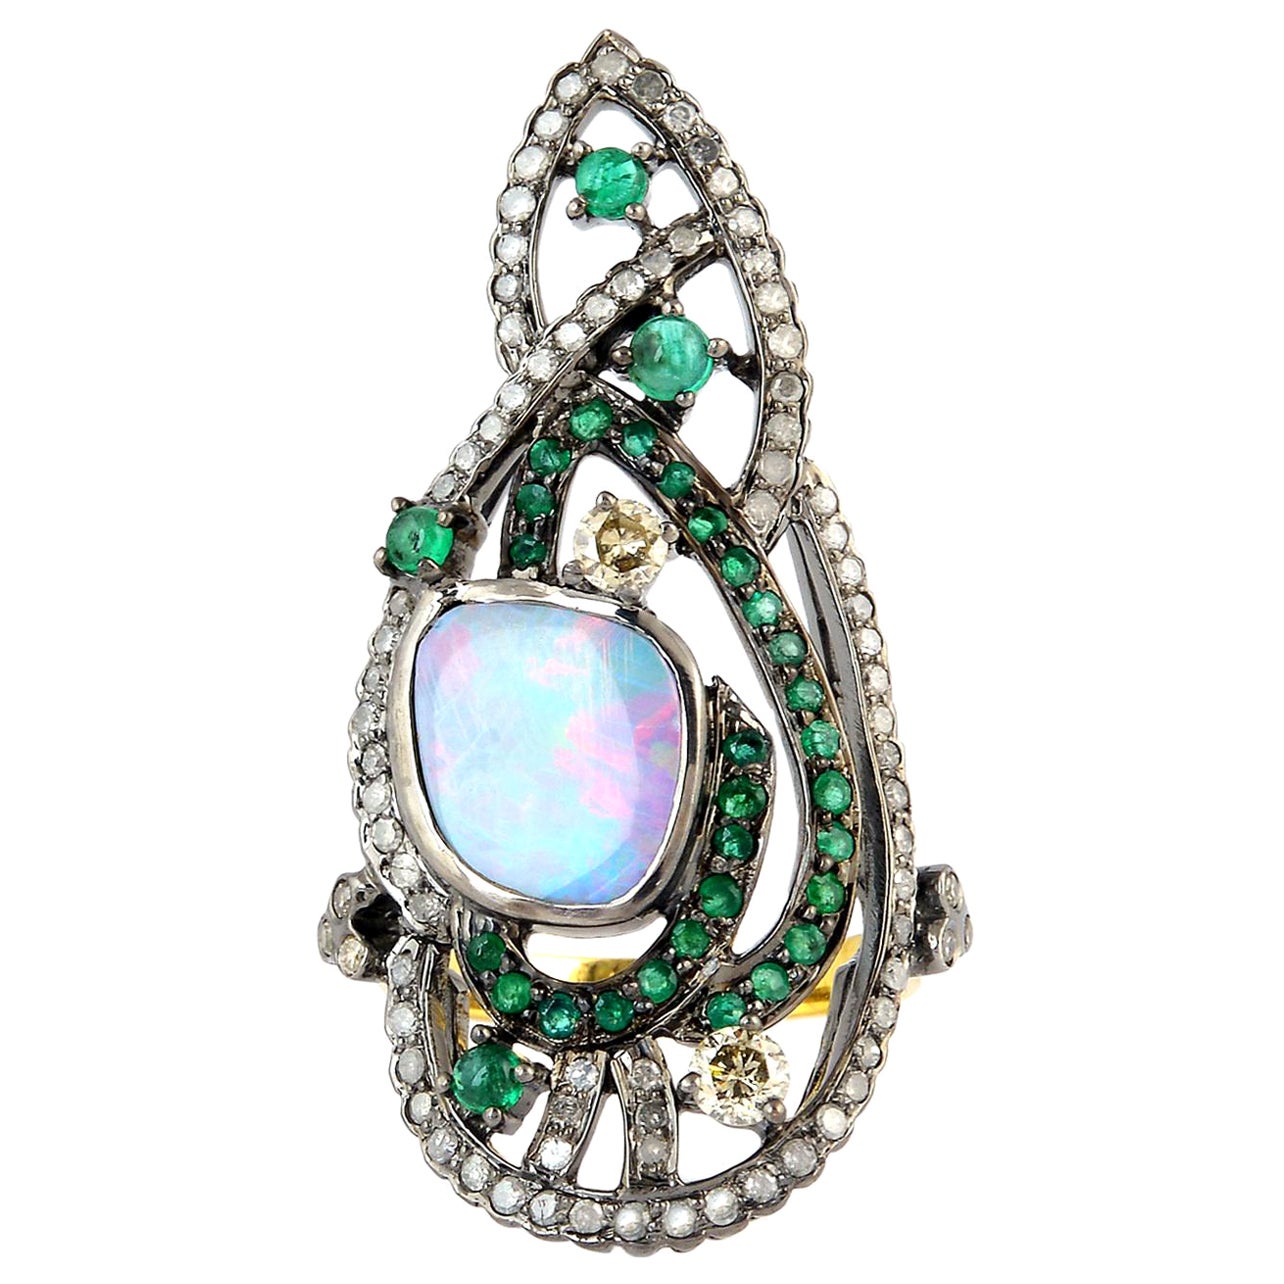 Long Ring with Emerald, Opal & Pave Diamonds Made in 18k Gold & Silver